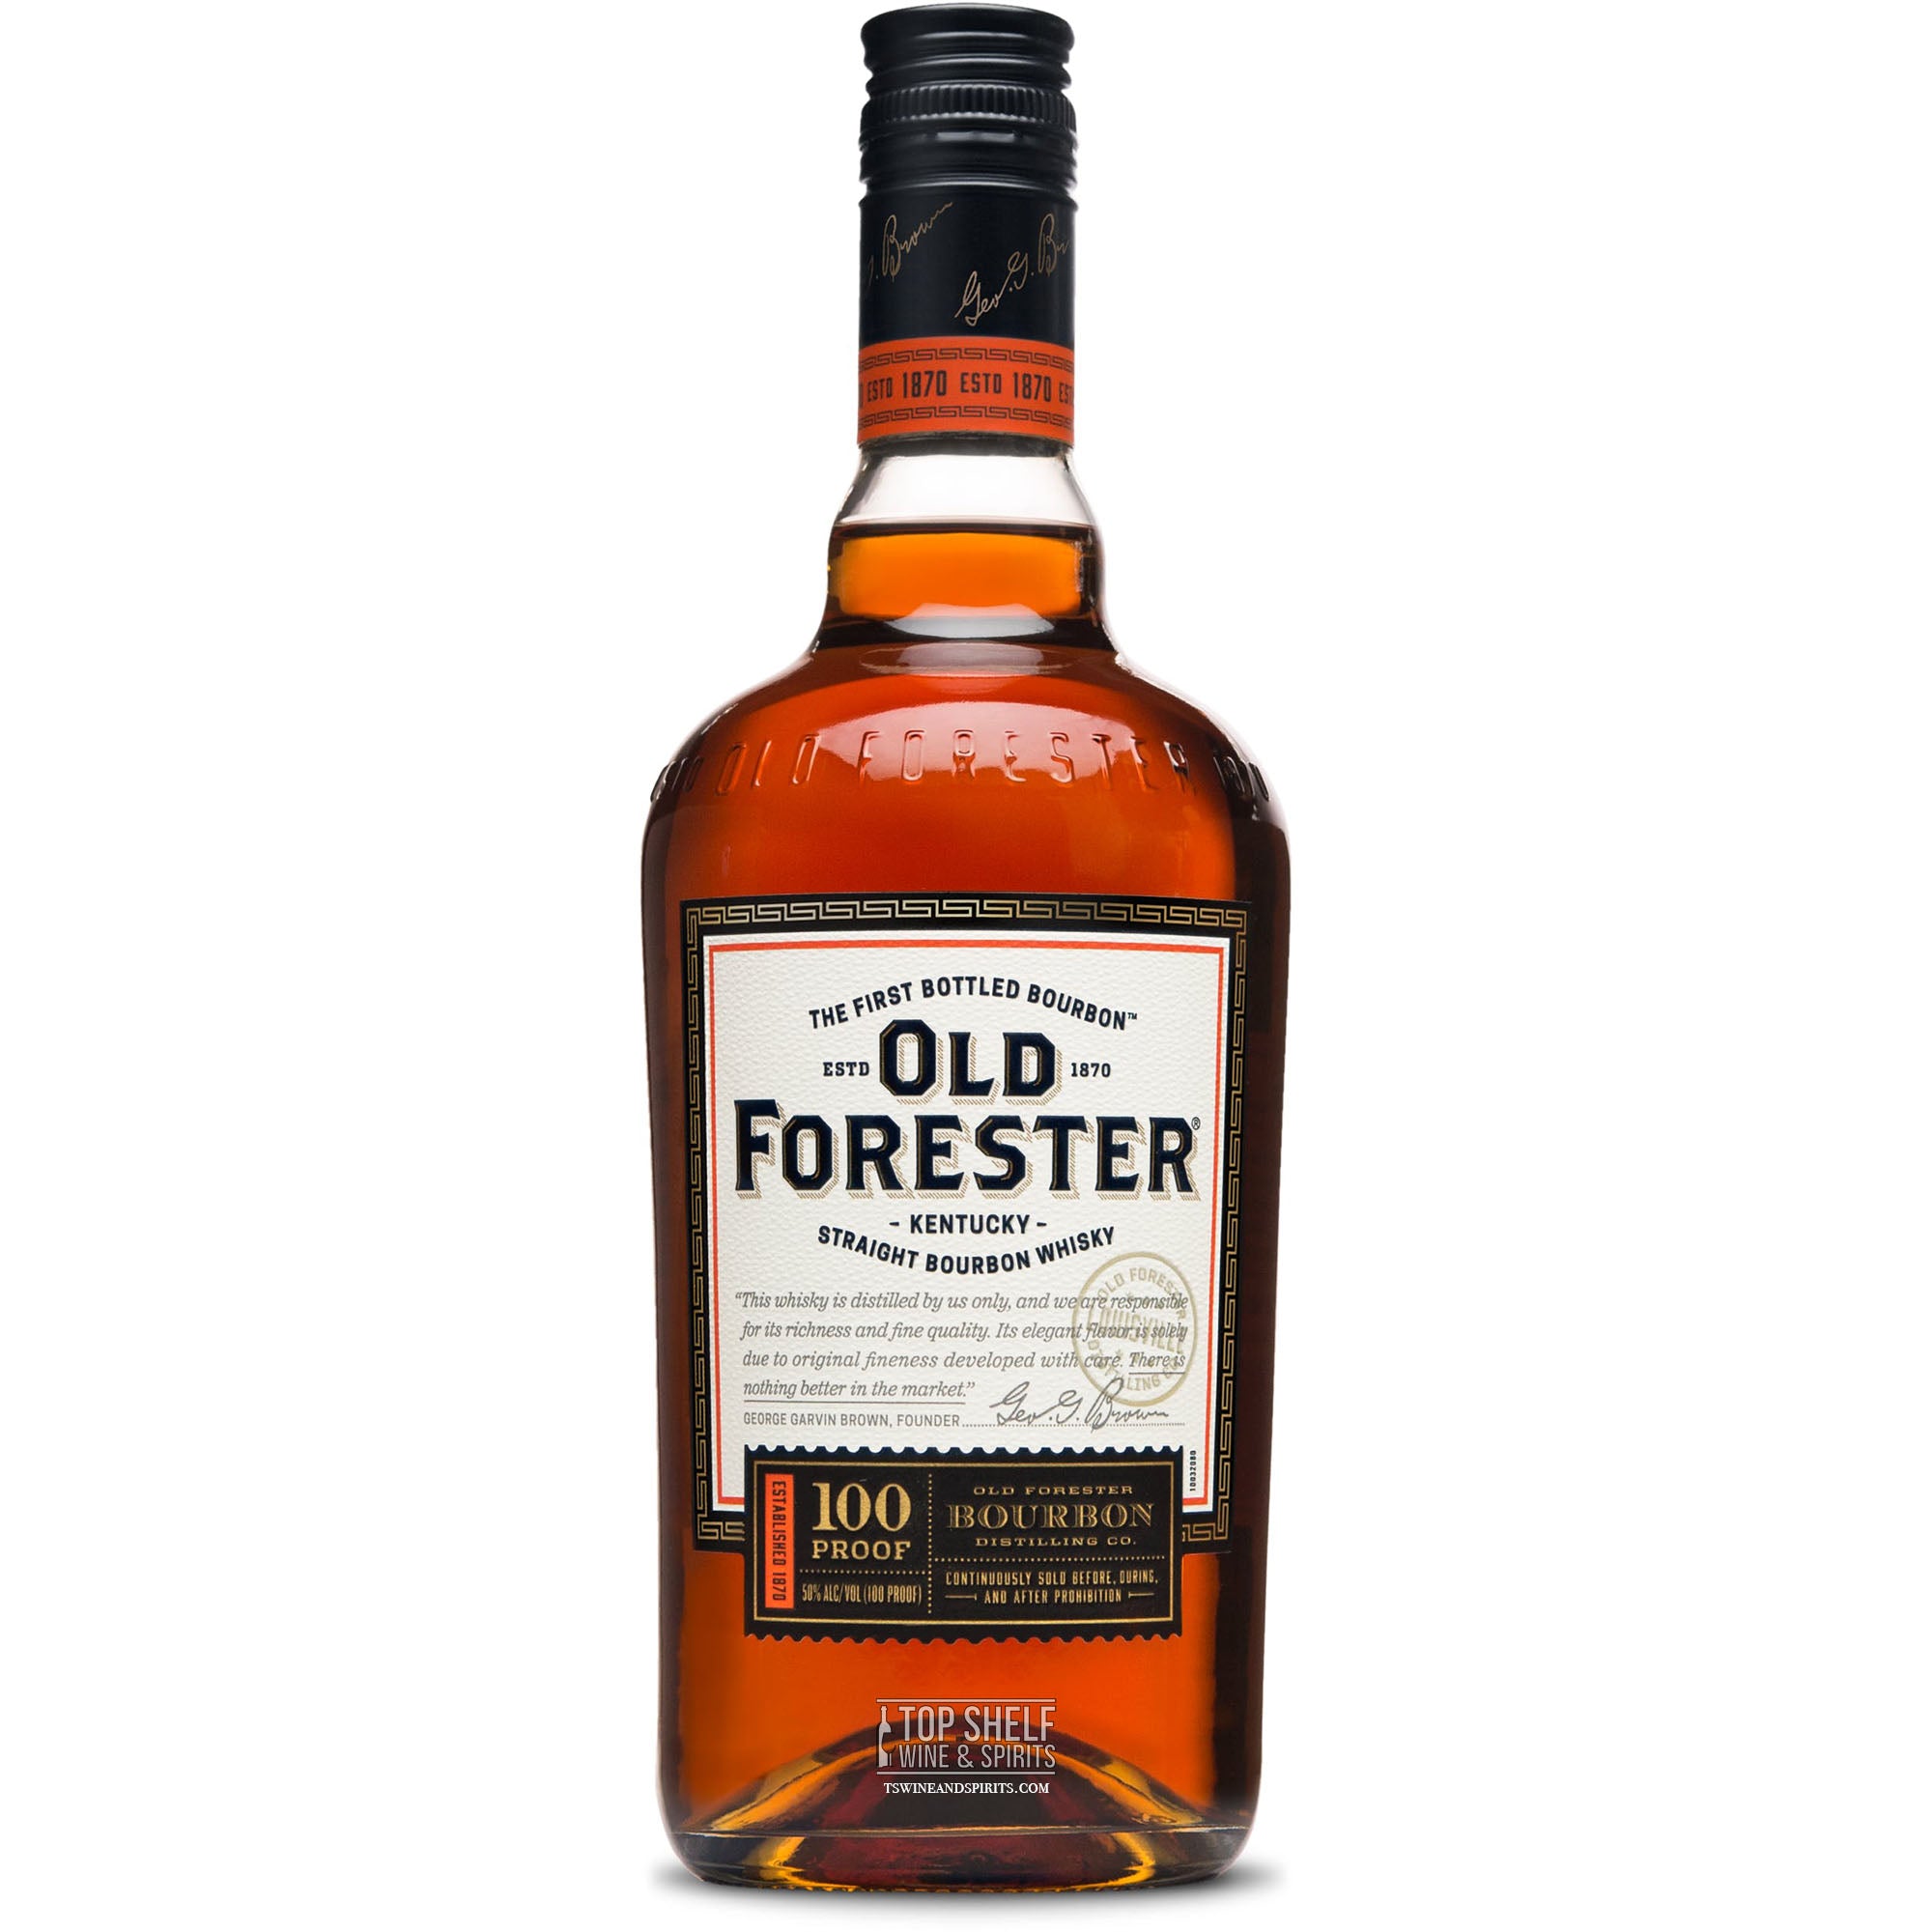 Old Forester Signature 100 Proof Bourbon